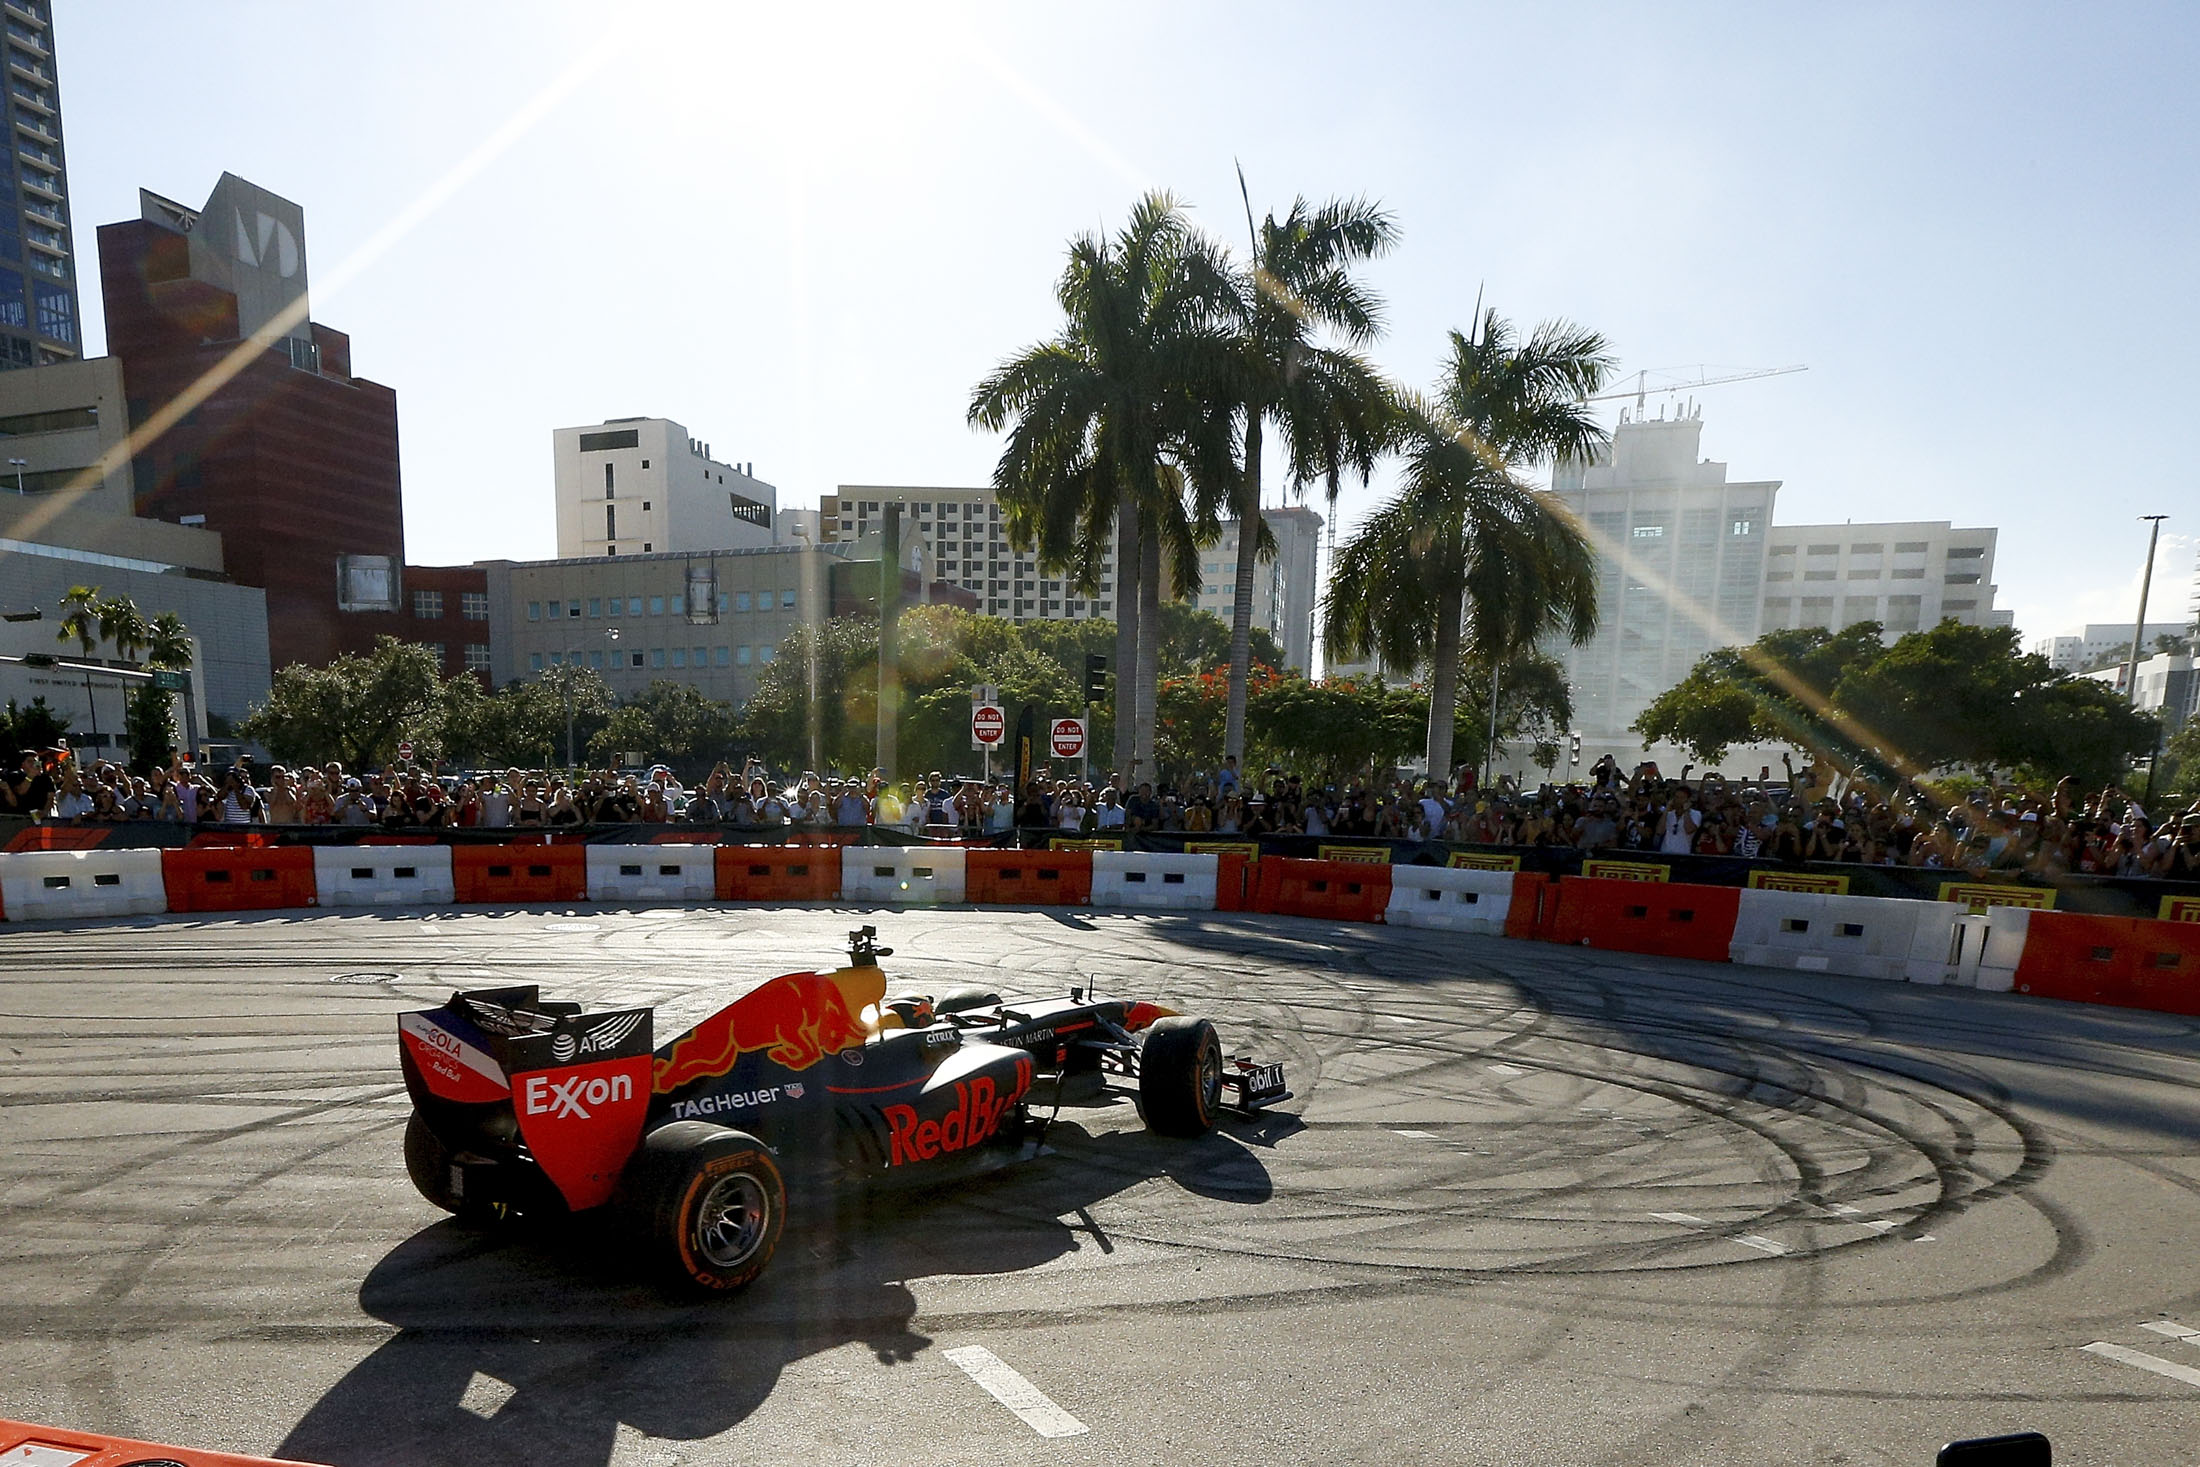 2012 Formula One World Championship rankings, points and